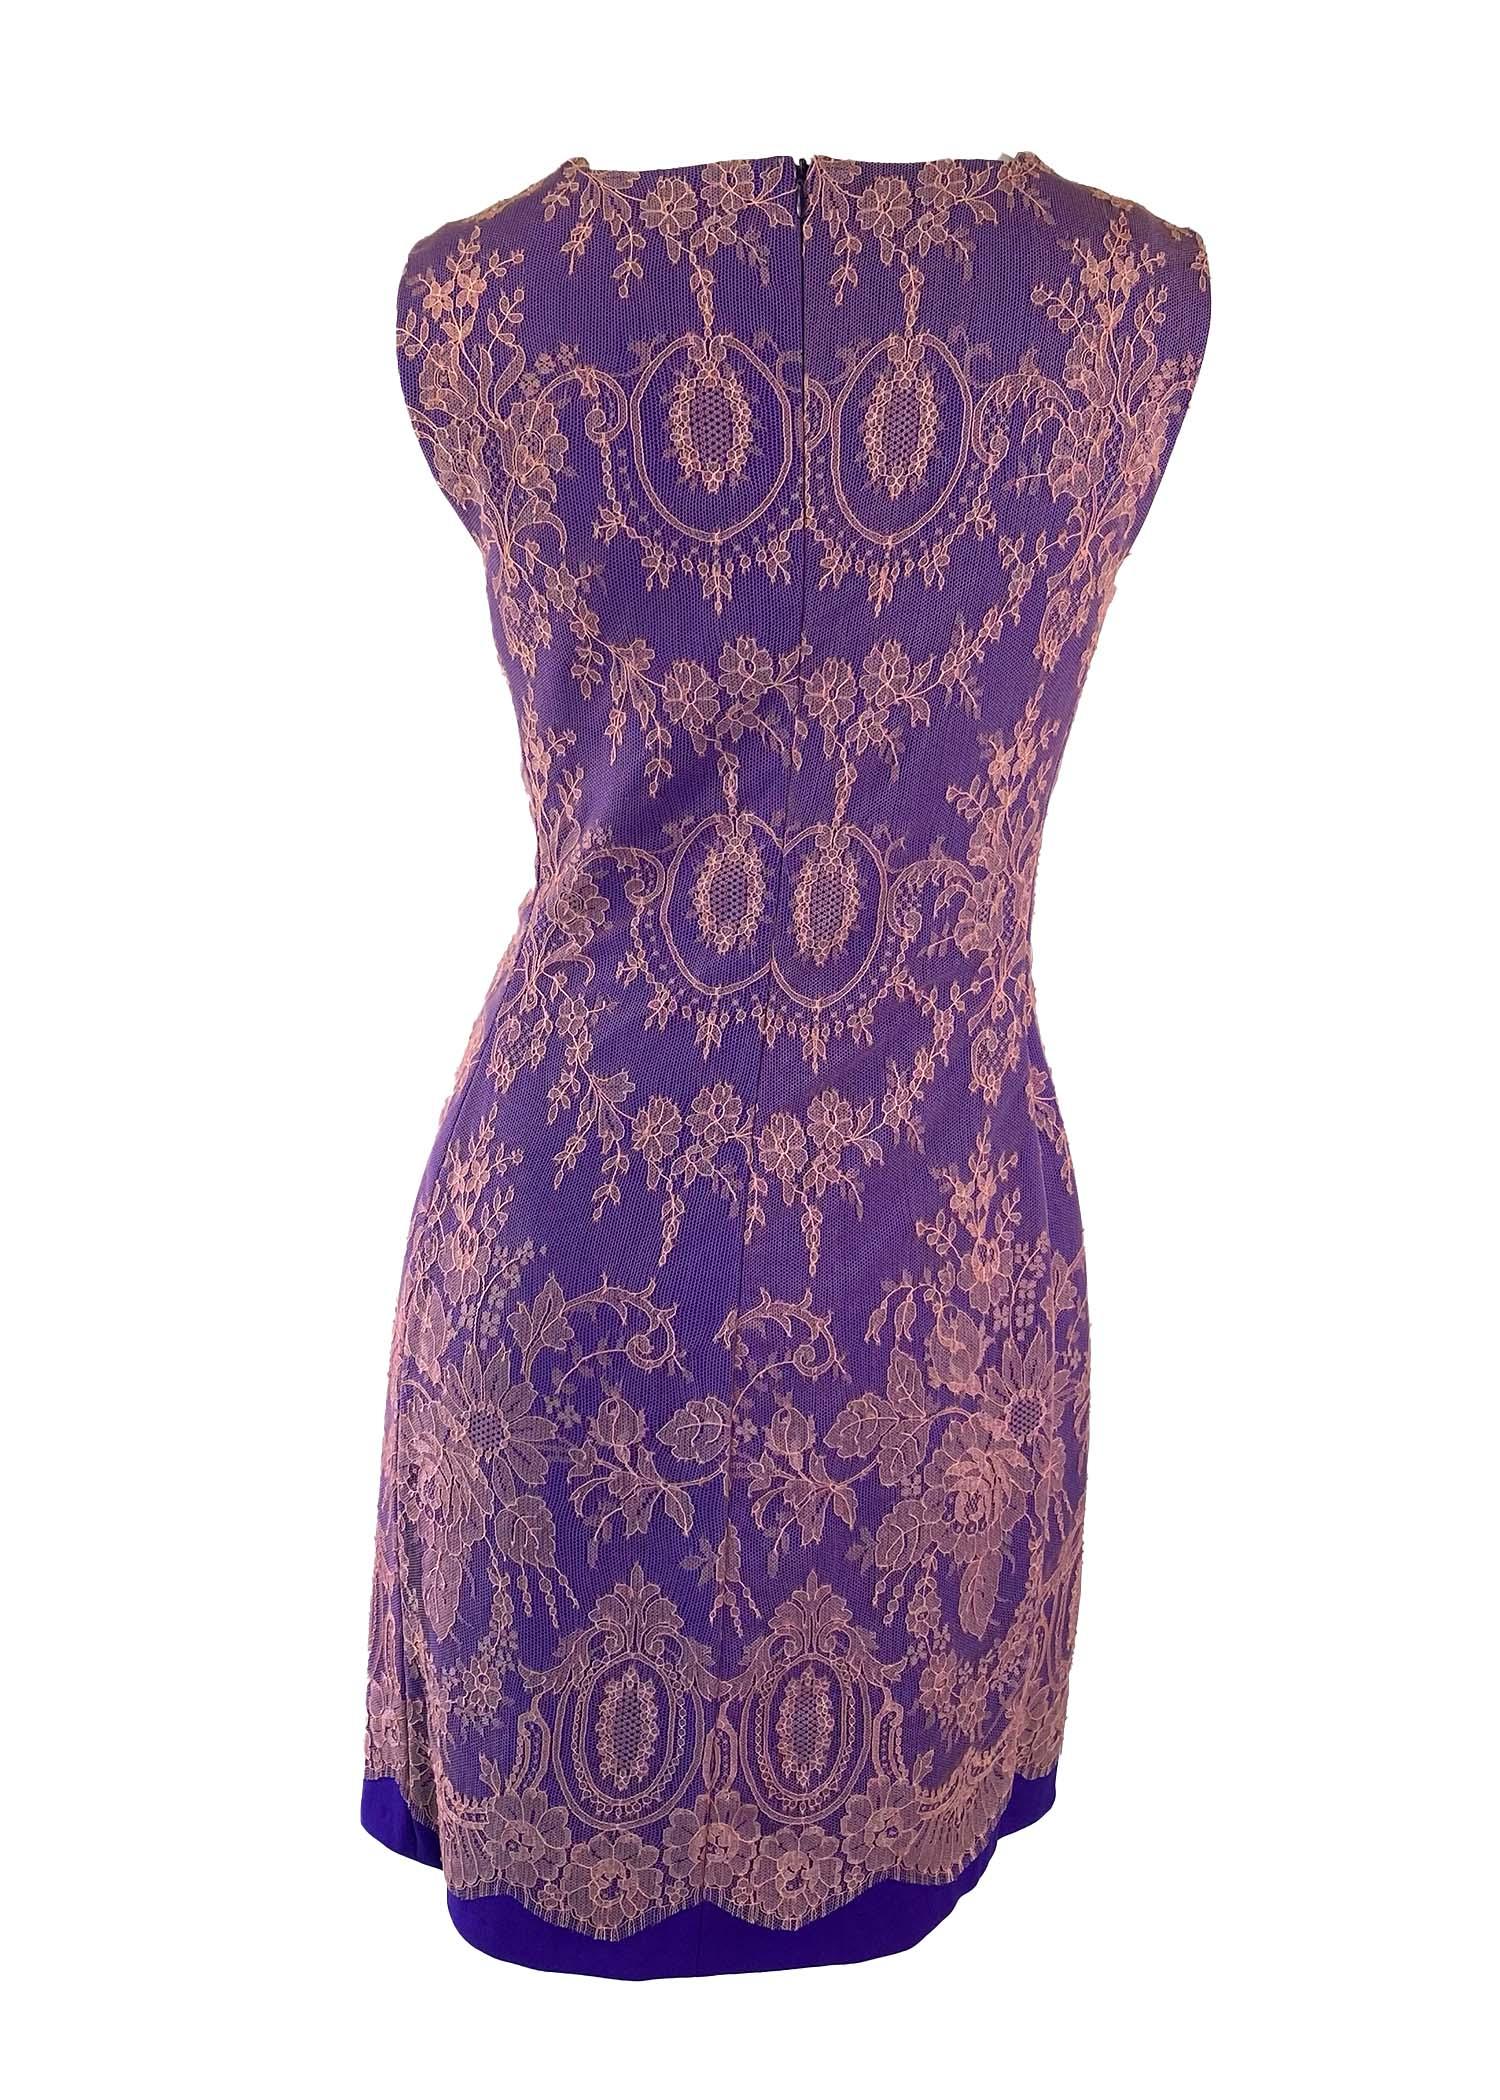 F/W 1996 Gianni Versace Couture Pink Lace Overlay Purple Mini Dress In Good Condition For Sale In West Hollywood, CA